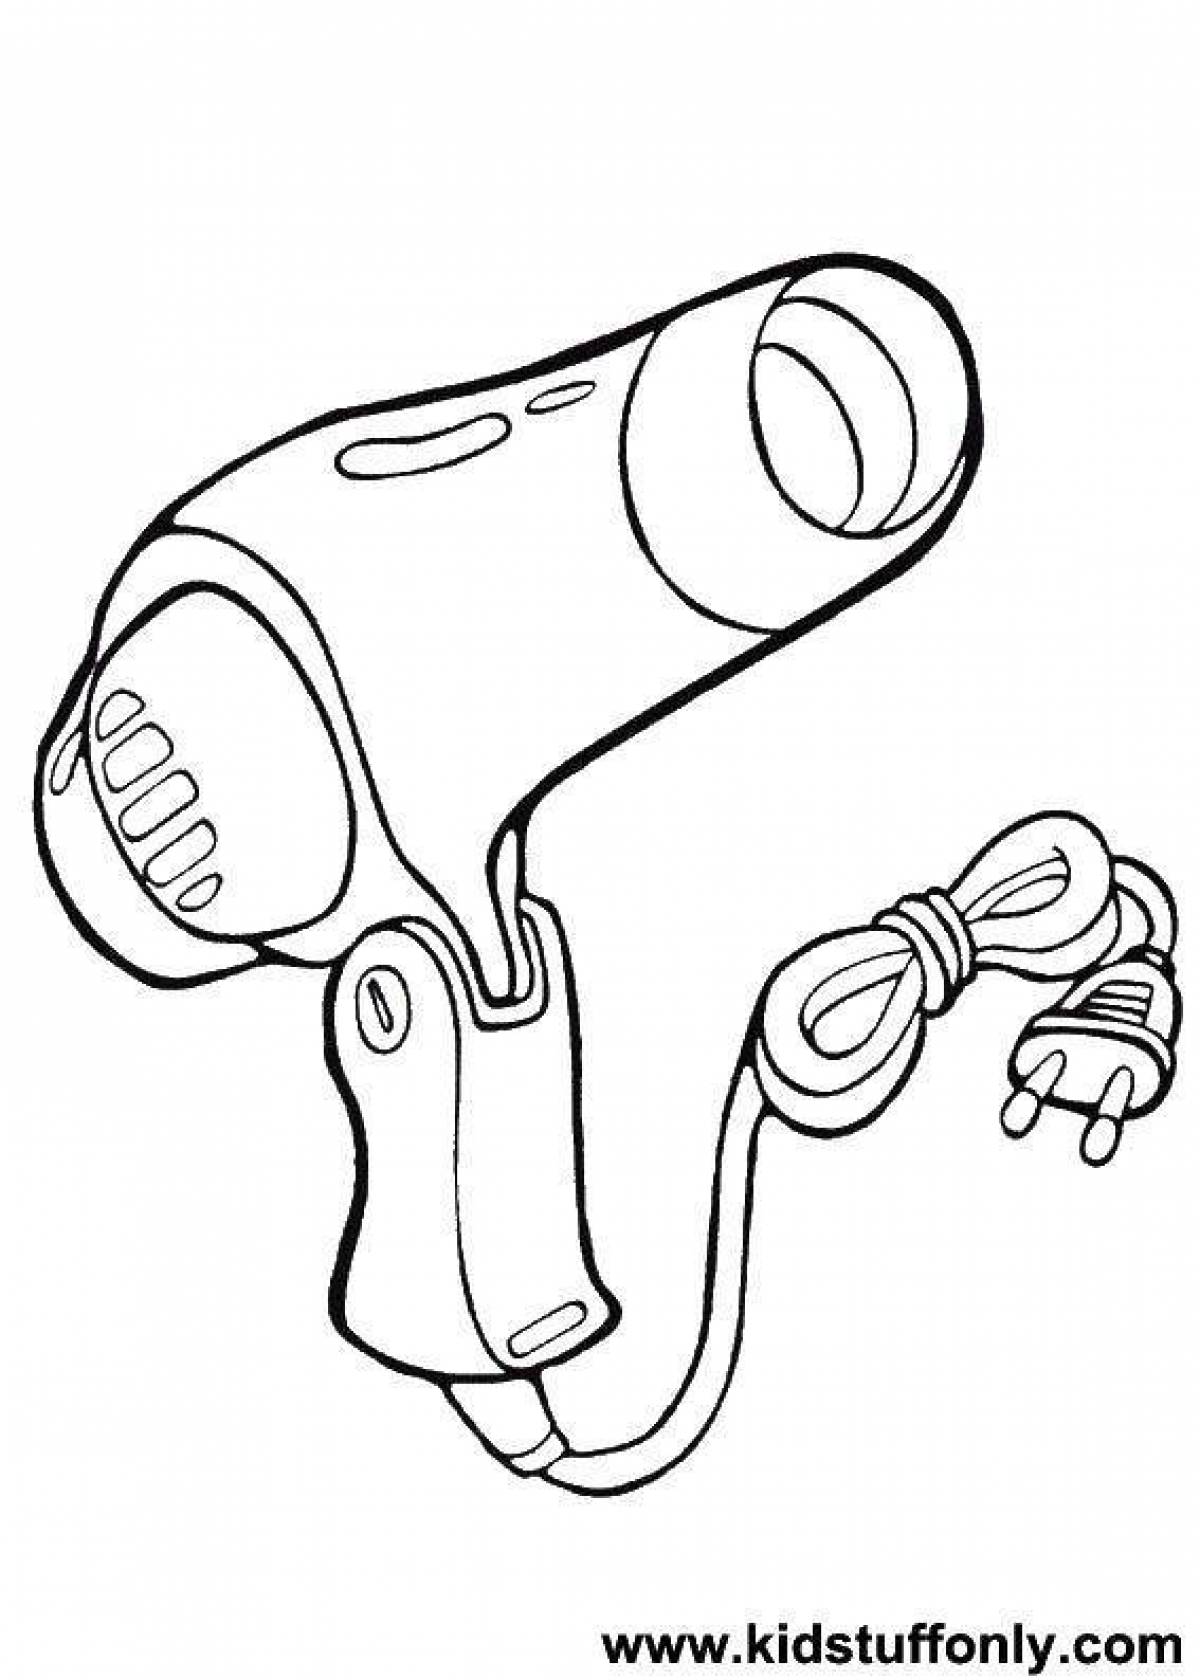 Coloring page funny electrical appliances